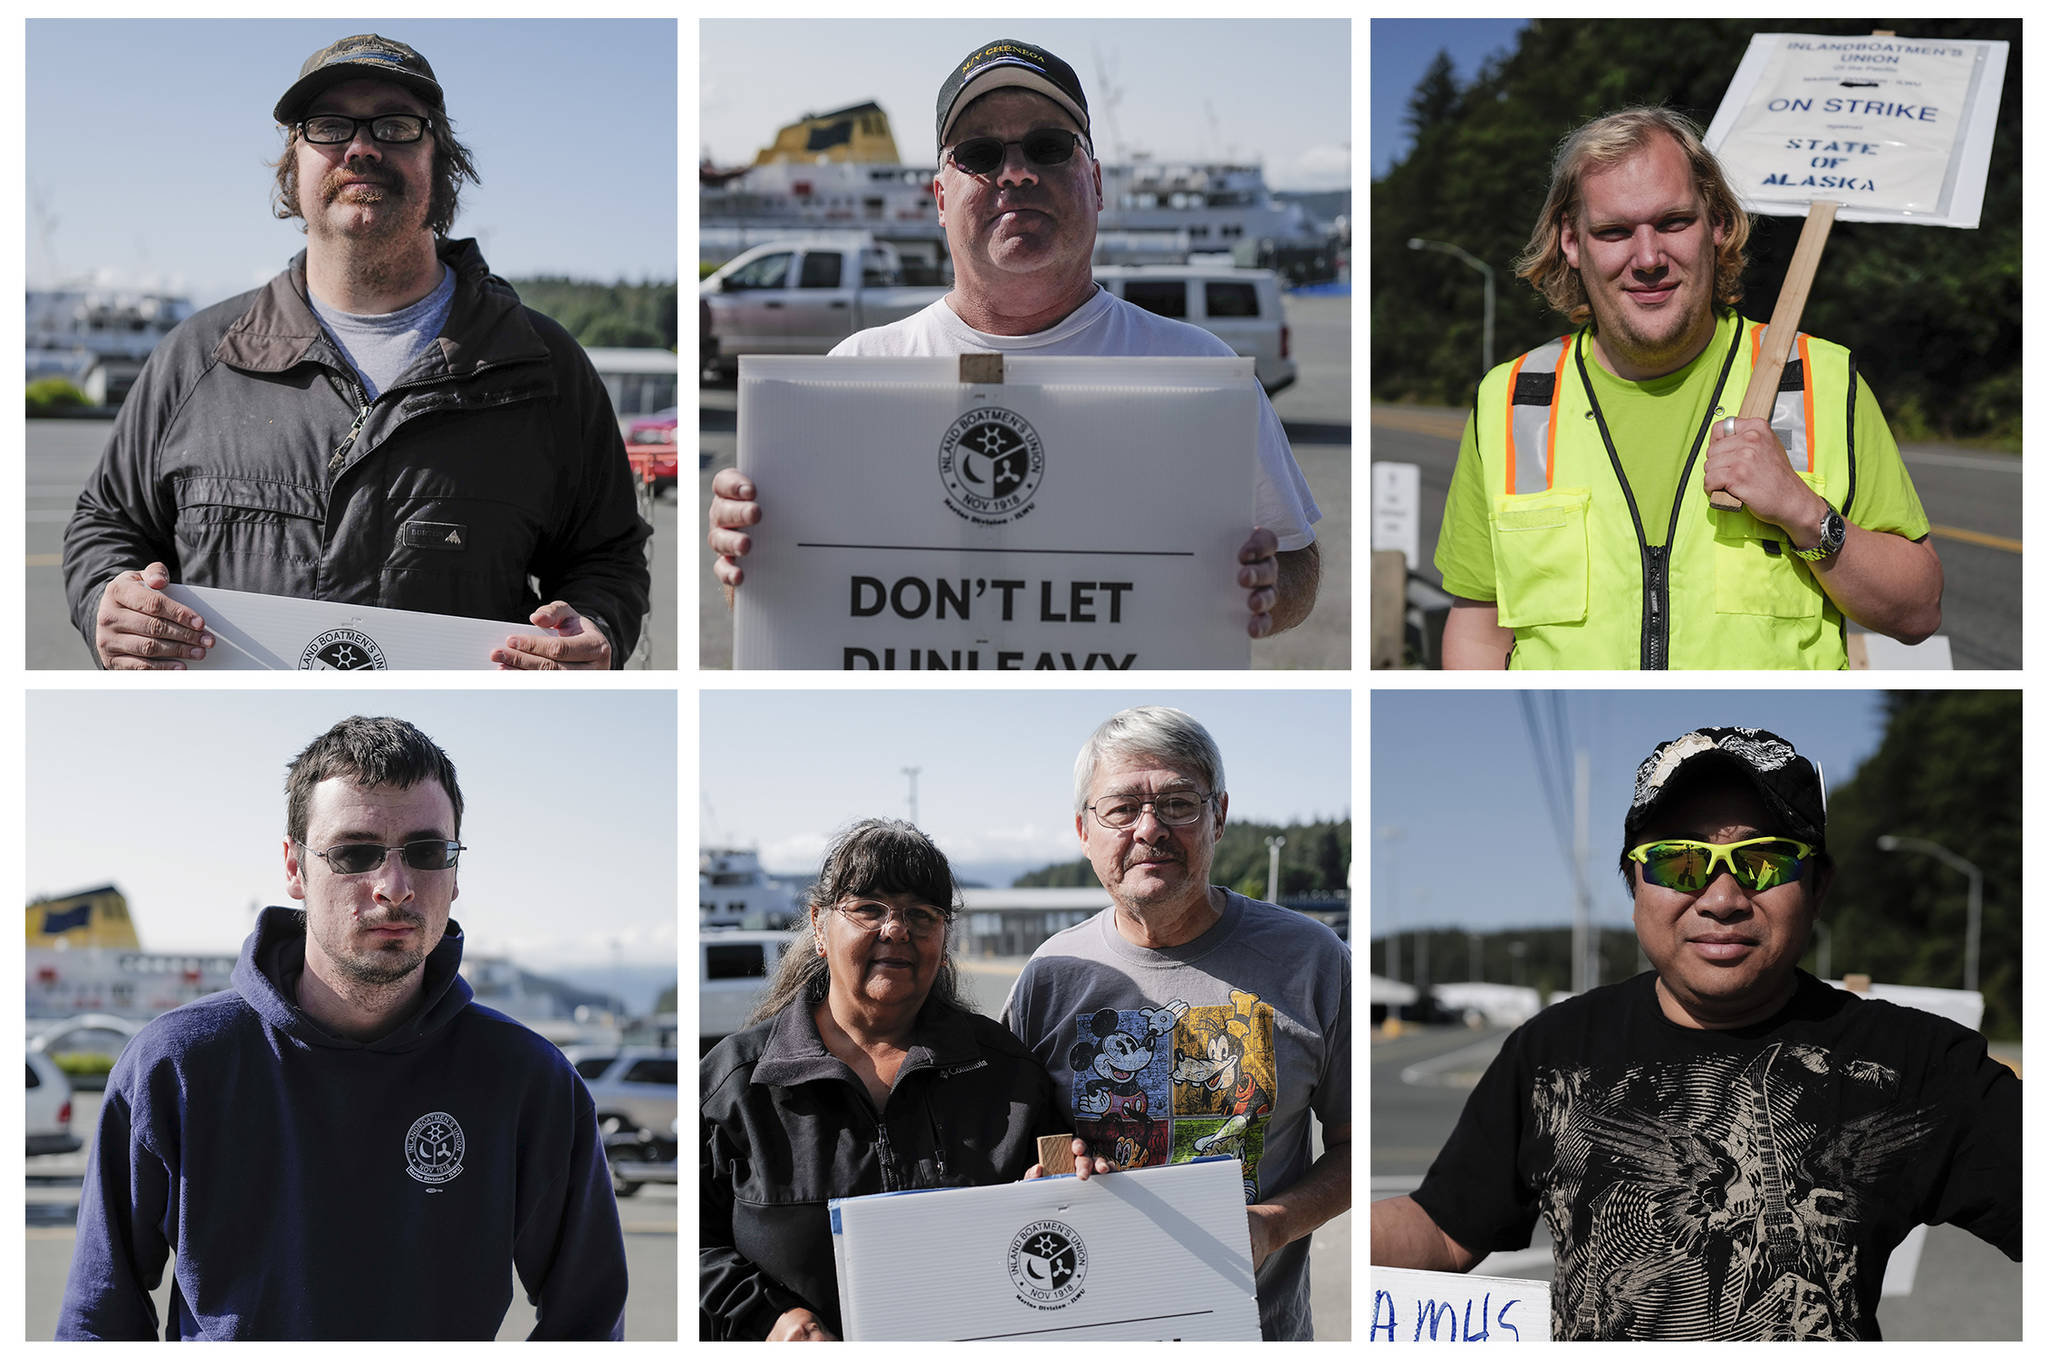 Portraits of six people at the picket line for the Inlandboatmen’s Union of the Pacific at the Alaska Marine Highway System’s Auke Bay Terminal on Tuesday, July 30, 2019. Pictured from left are Joseph Garrett, Dane Dickey, Conan Leegard, Paul Lorentz, Carl Weimer with his wife Sharilee, and Johnny Ruiz. (Michael Penn | Juneau Empire)